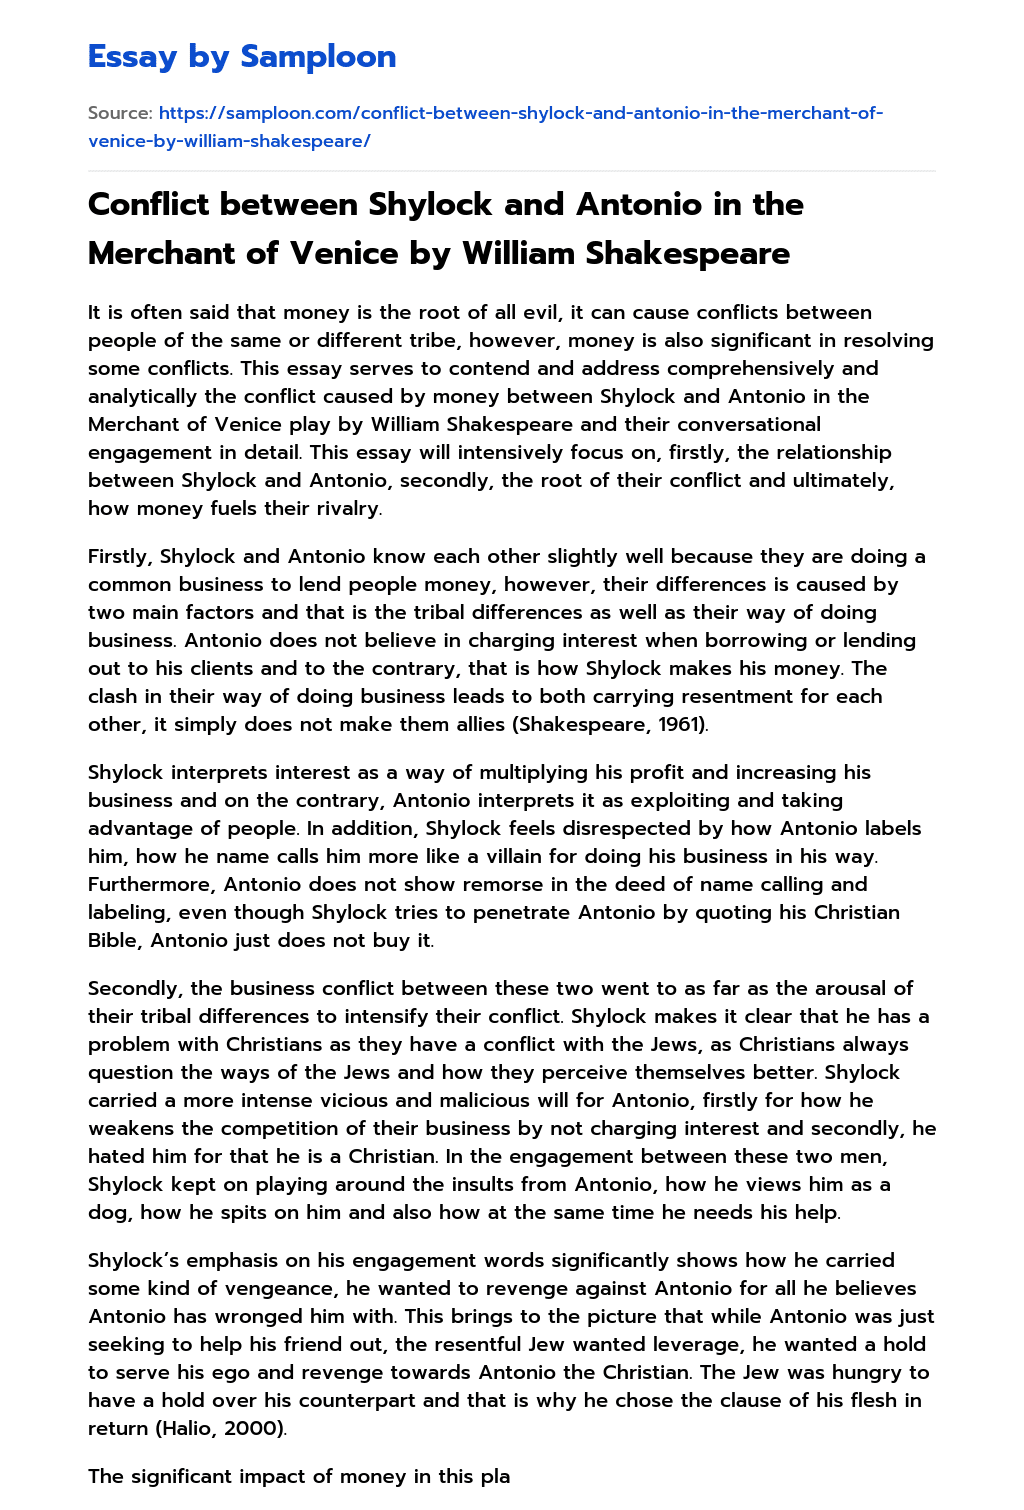 Conflict between Shylock and Antonio in the Merchant of Venice by William Shakespeare Summary essay